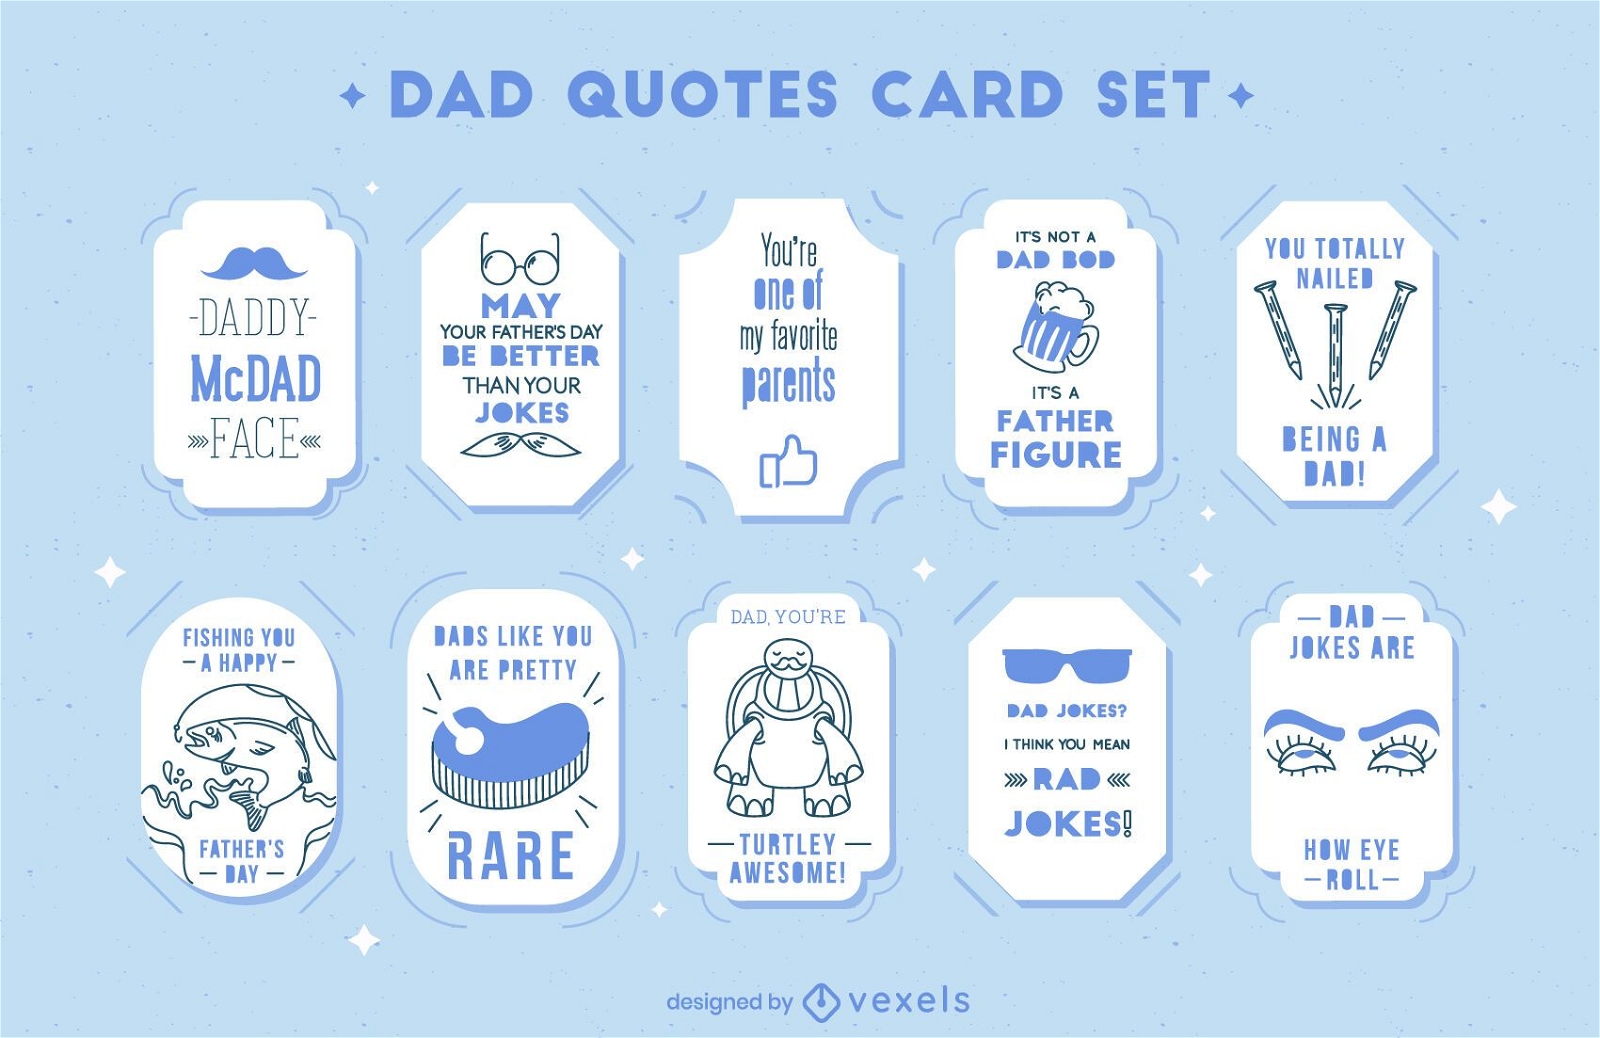 Fathers day funny dad quotes card set